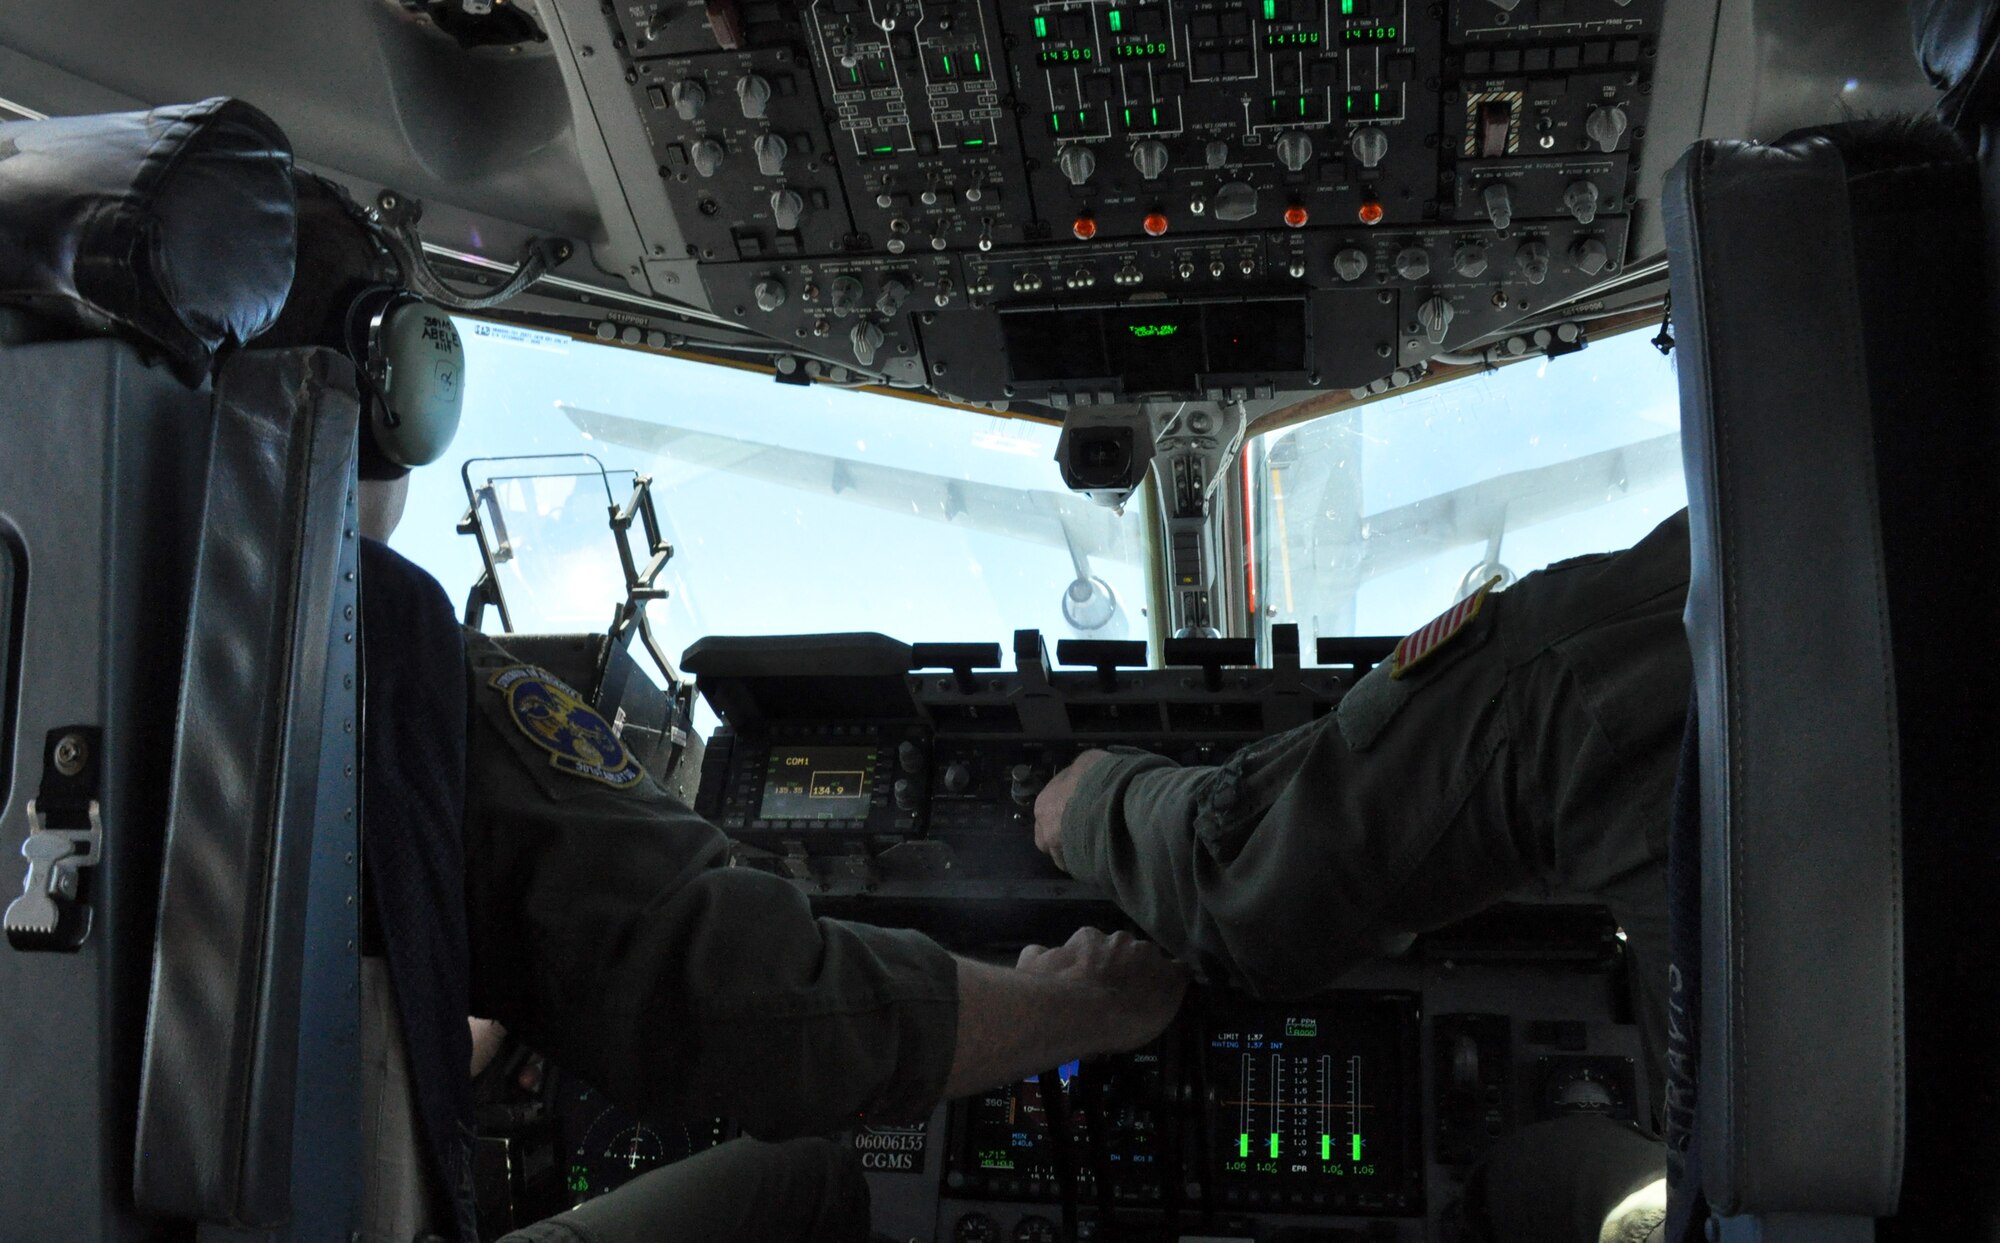 Majs. Matthew Abele and Malcom Westberry, both 301st Airlift Squadron C-17 Globemaster III pilots, close in on a KC-10 Extender during an in-air refueling over northern California on July 22, 2017. The aircraft, both from Travis Air Force Base, Calif., were performing training flights in conjunction with the 349th Air Mobility Wing's Patriot Wyvern exercise. (U.S. Air Force photo by Senior Airman Shelby R. Horn/Released)